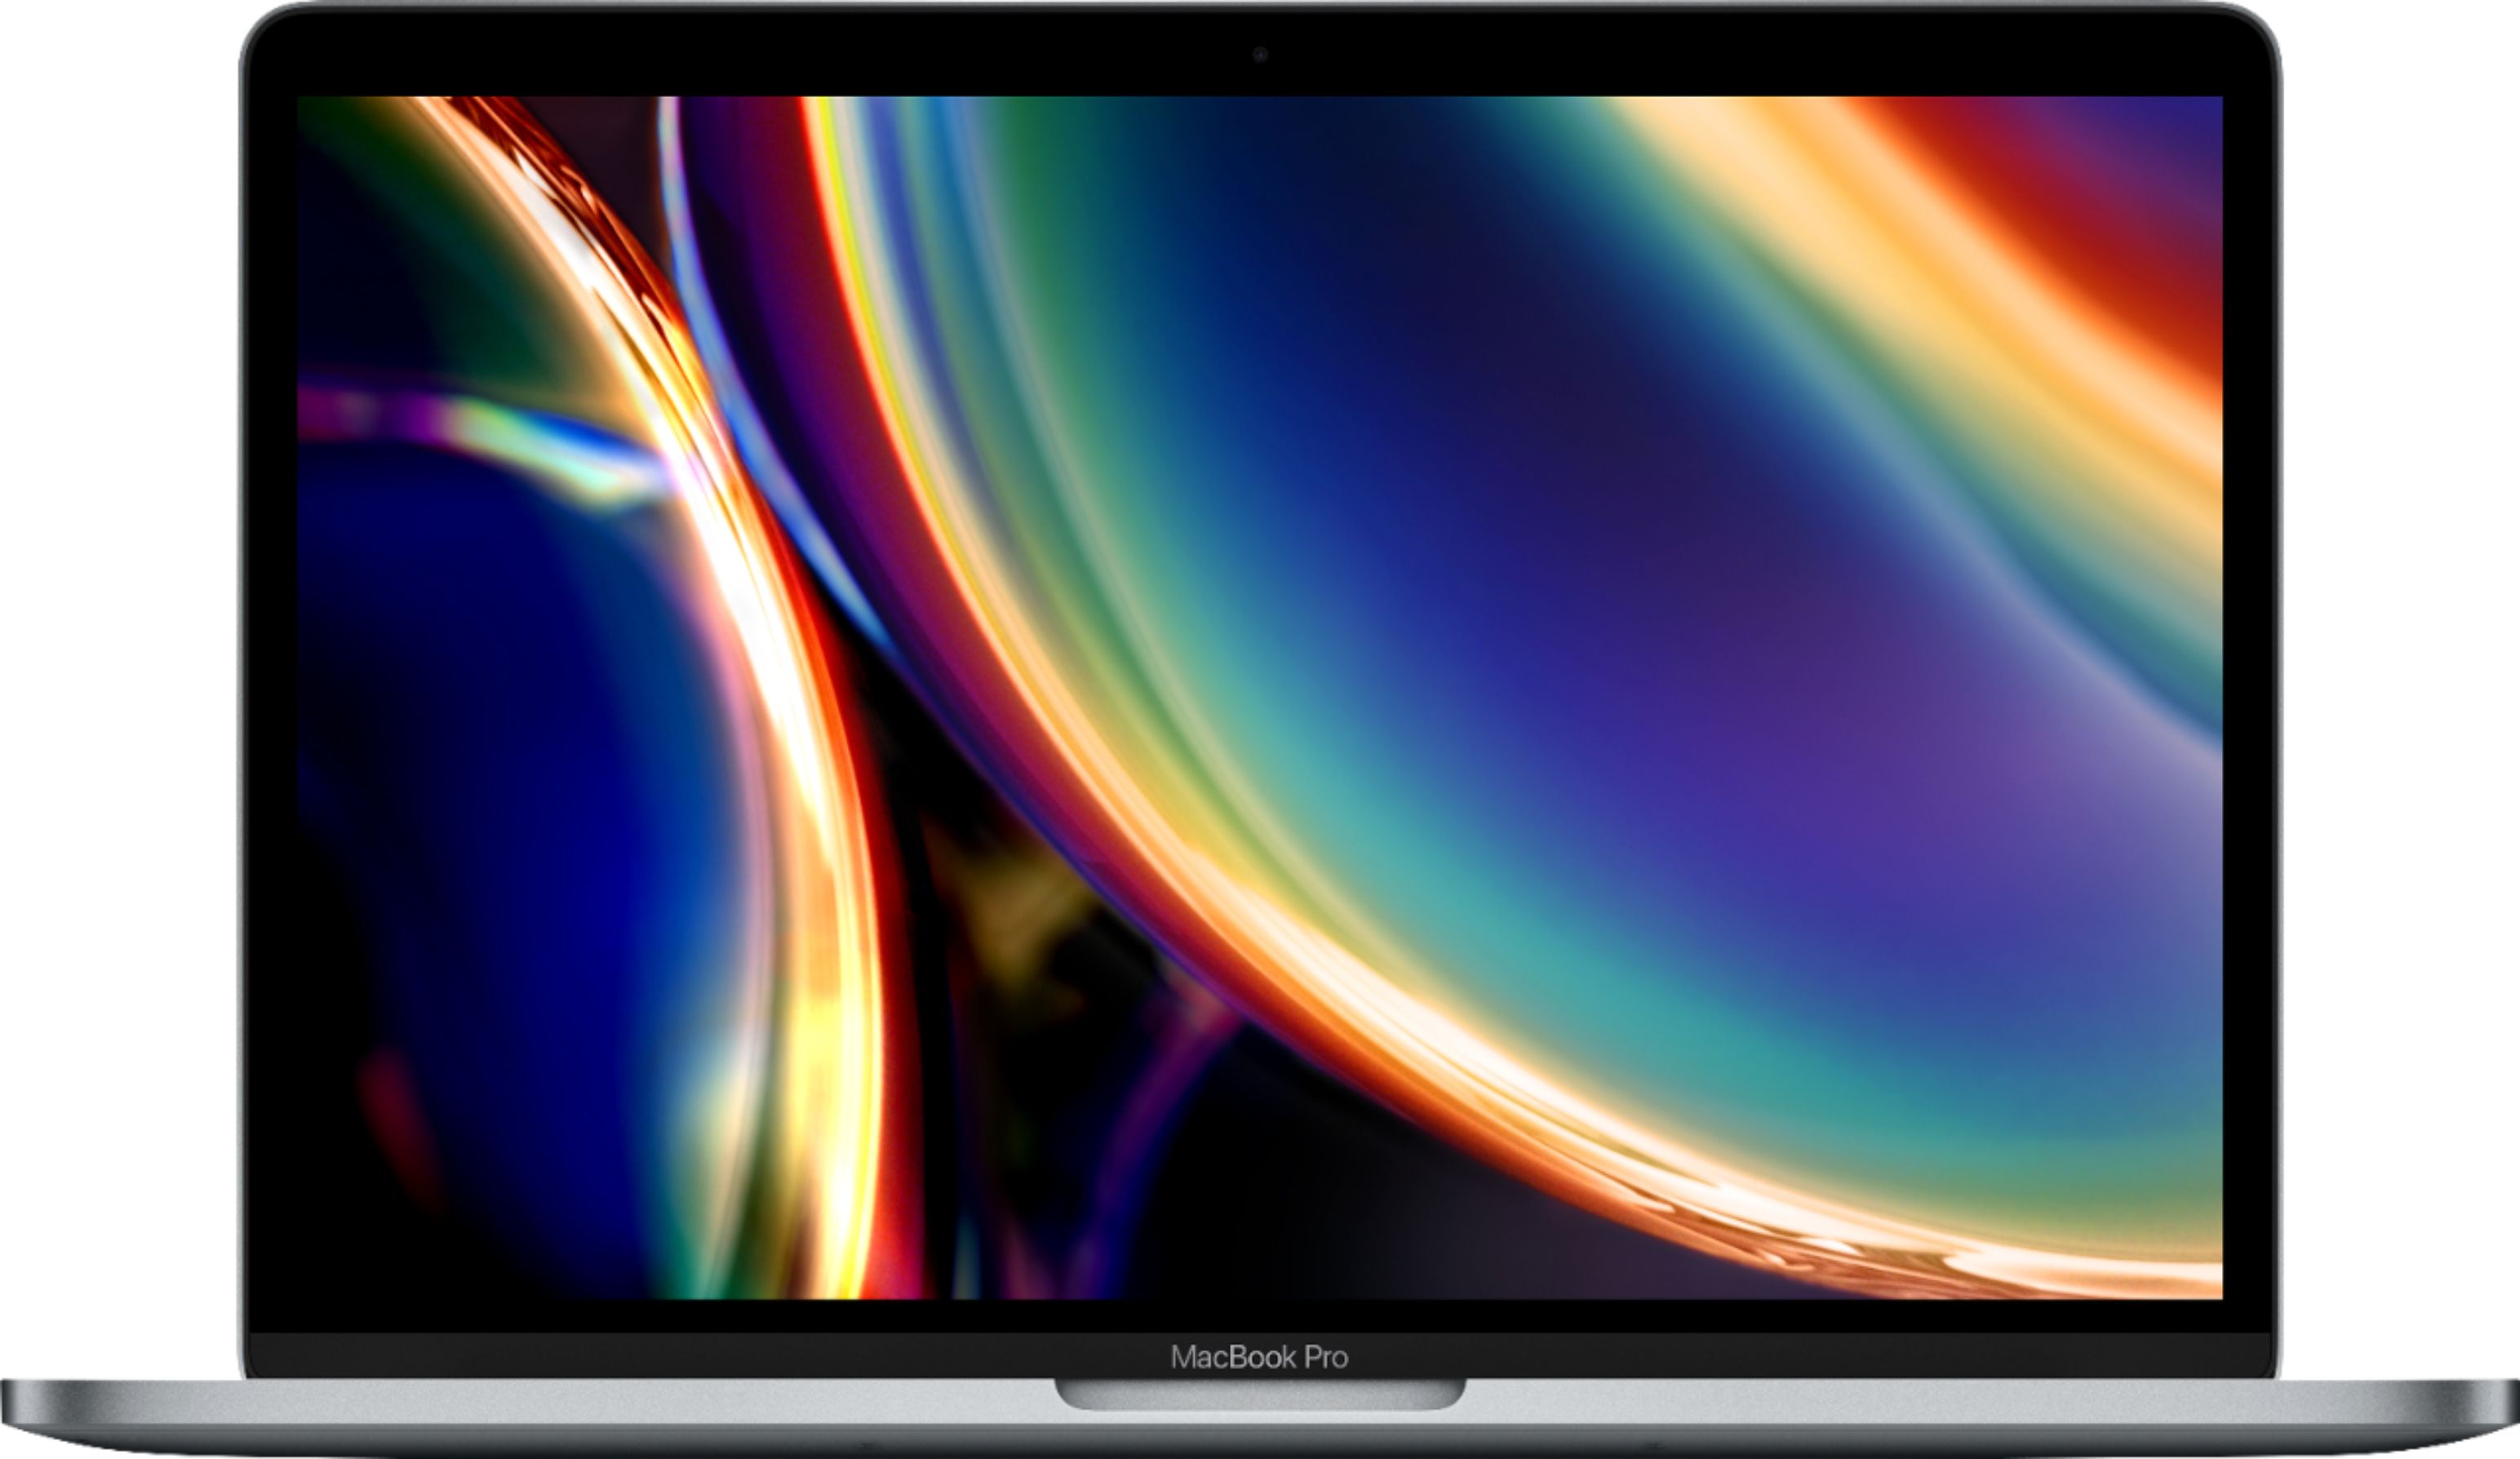 Apple - MacBook Pro - 13" Display with Touch Bar - Intel Core i5 - 8GB Memory - 256GB SSD (Latest Model) - Space Gray